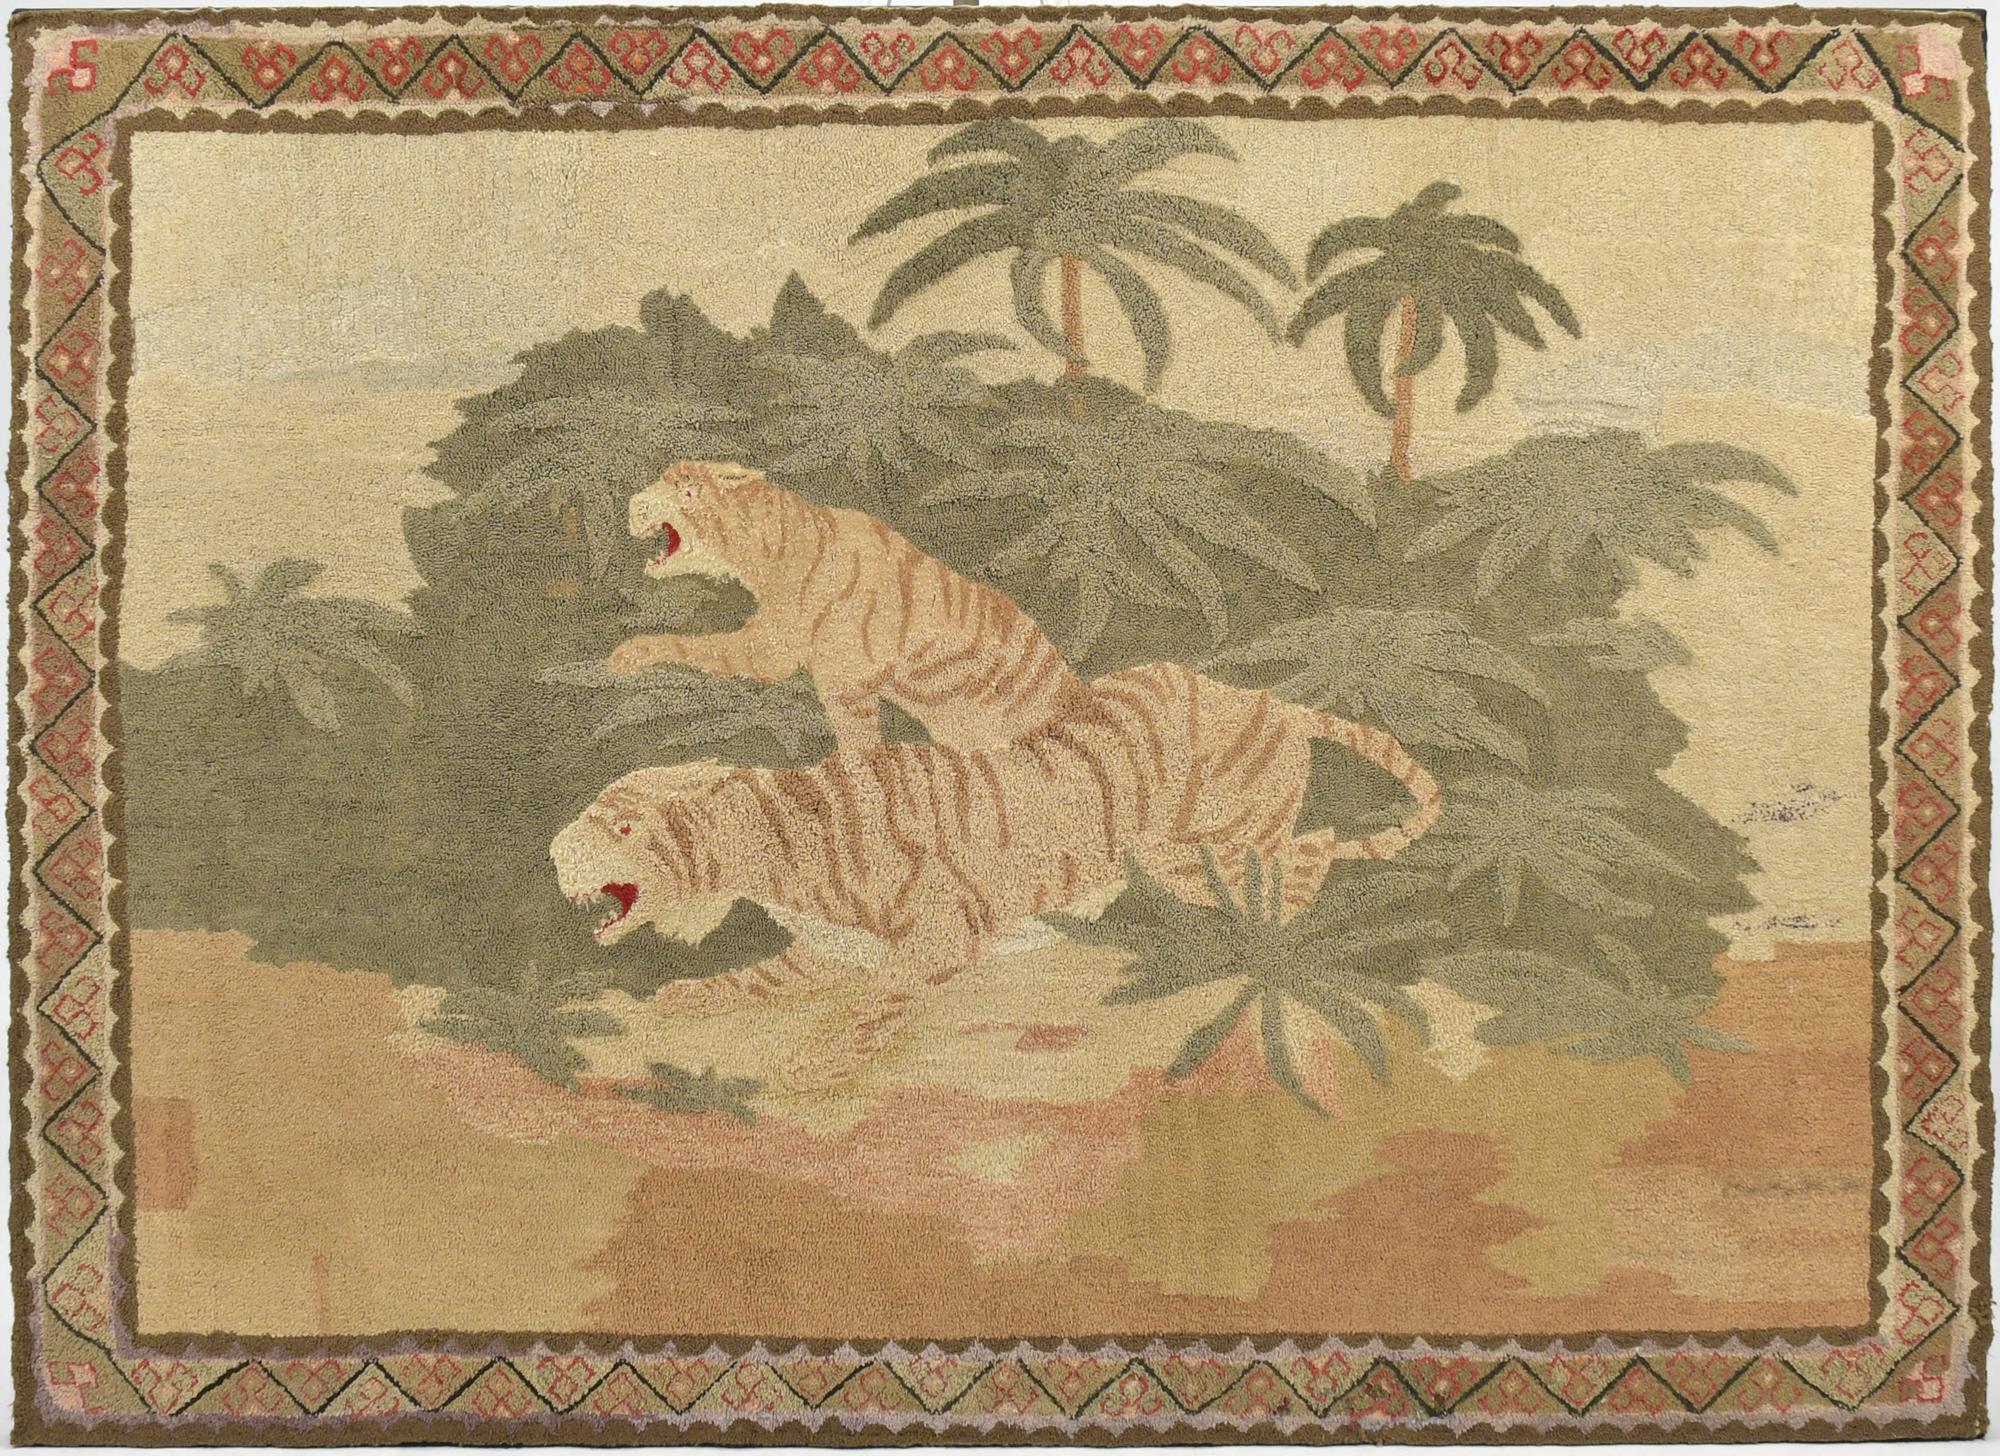 LARGE 19TH C. HOOKED RUG, TIGERS.